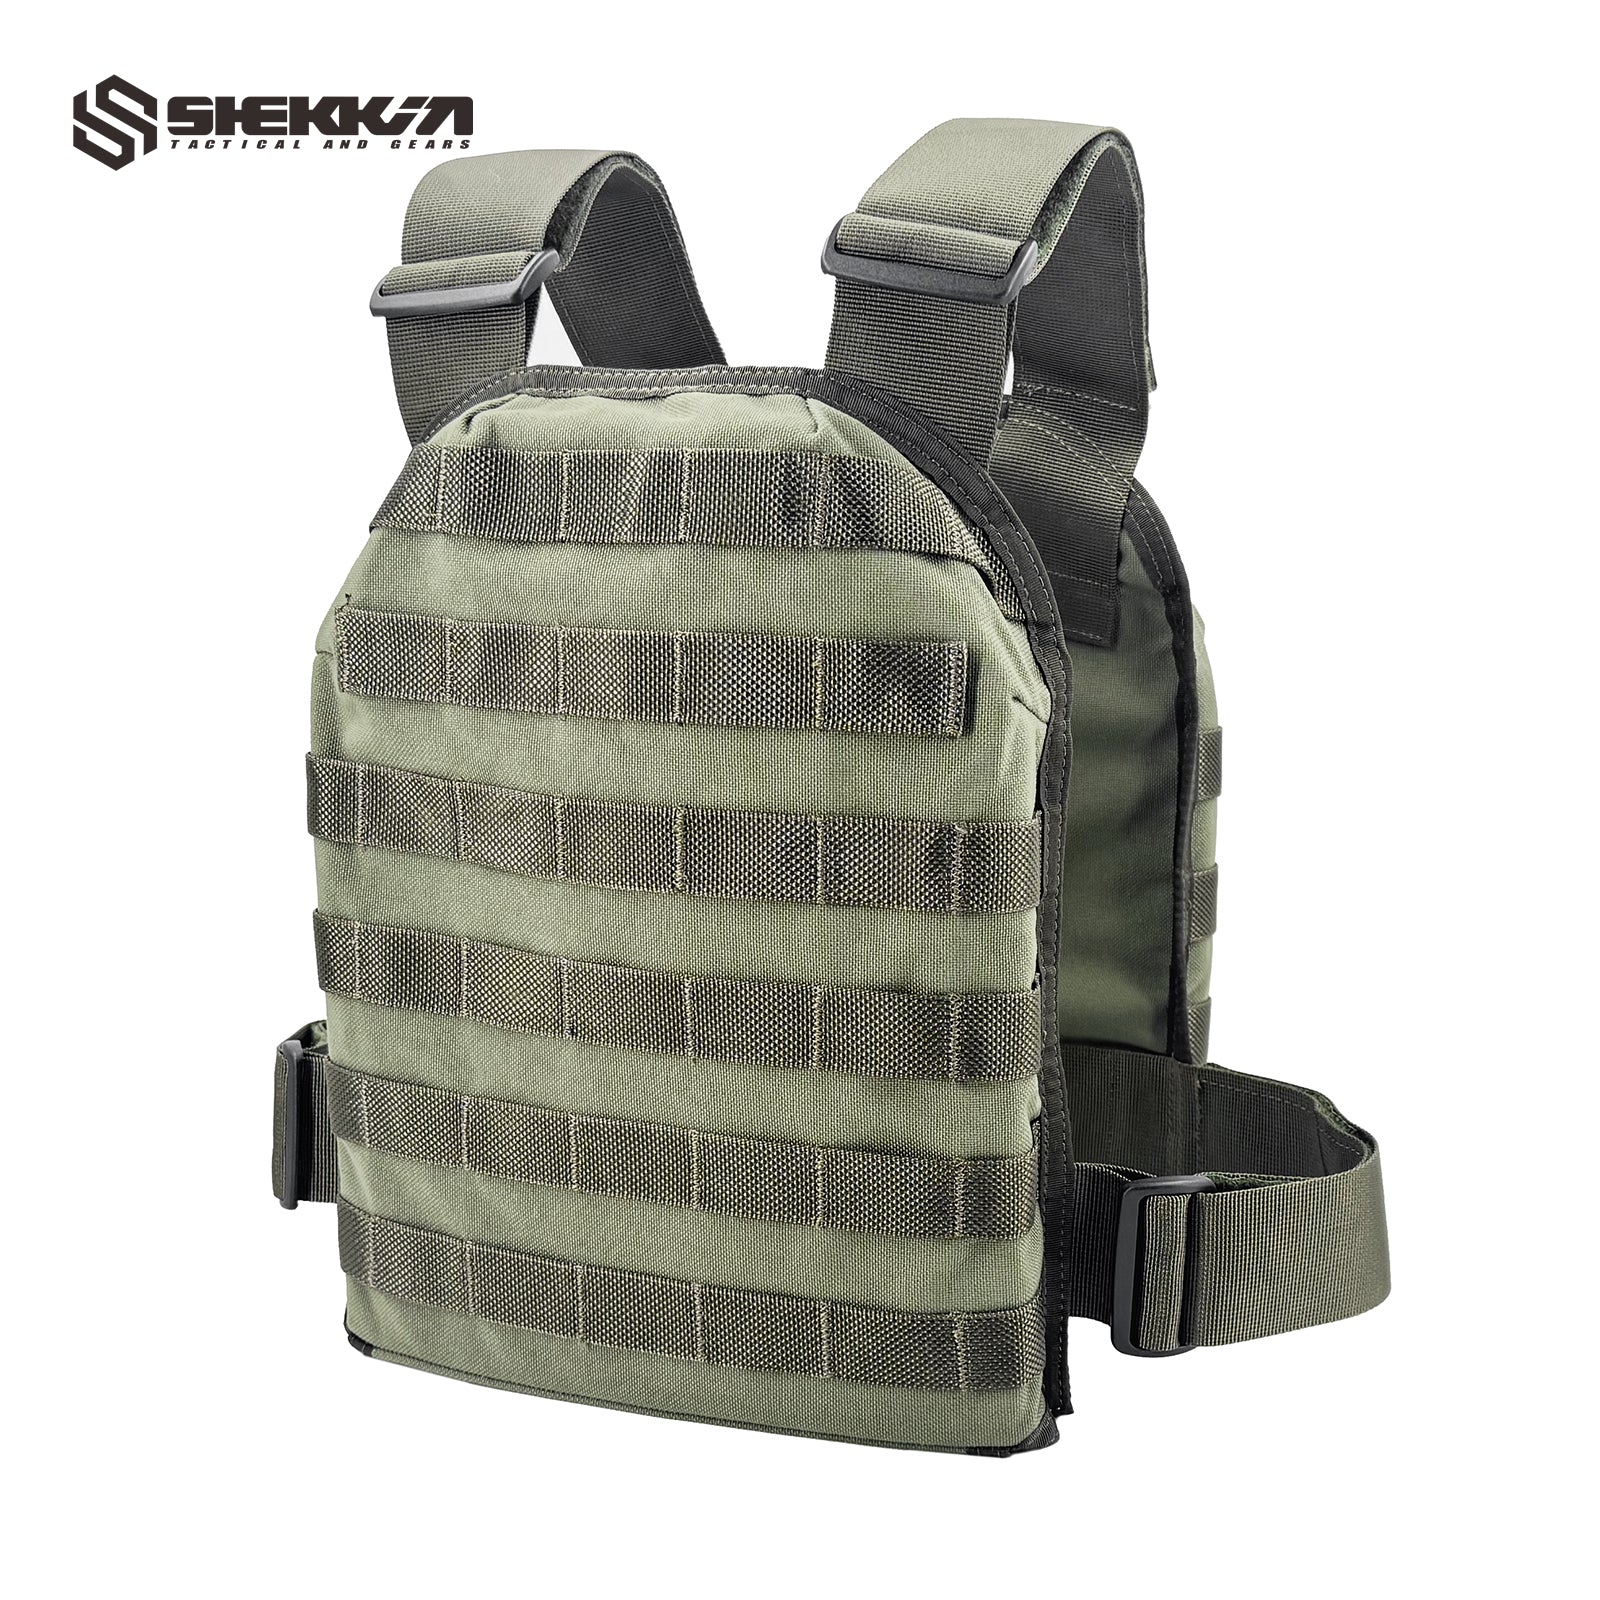 Delta force CAG paraclete HPV plate carrier - Shekkin Gears